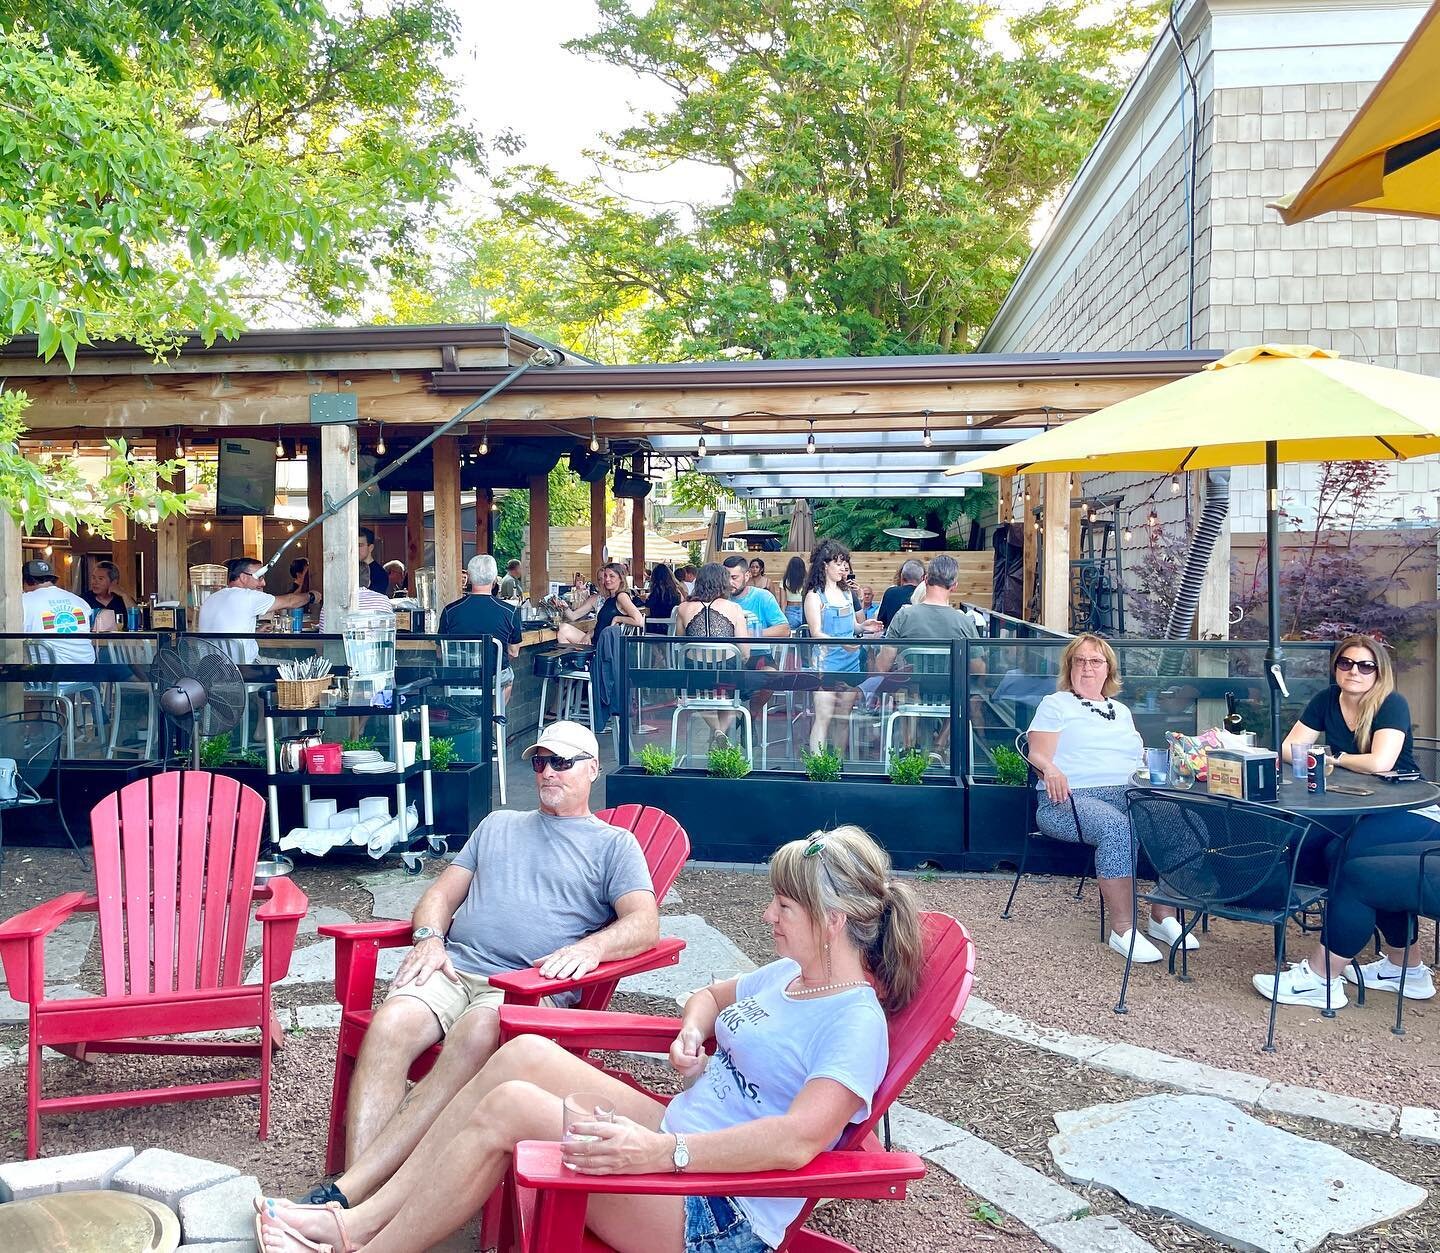 Soak up the last of the summer vibes with some killer live music coming up 
Tonight: Dave Ramont&mdash;local treasure

Thursday: Magoo&mdash;the most fun to be had in the Fox Valley

Friday: Gregory Hyde&mdash;if you&rsquo;ve seen him, you know you g